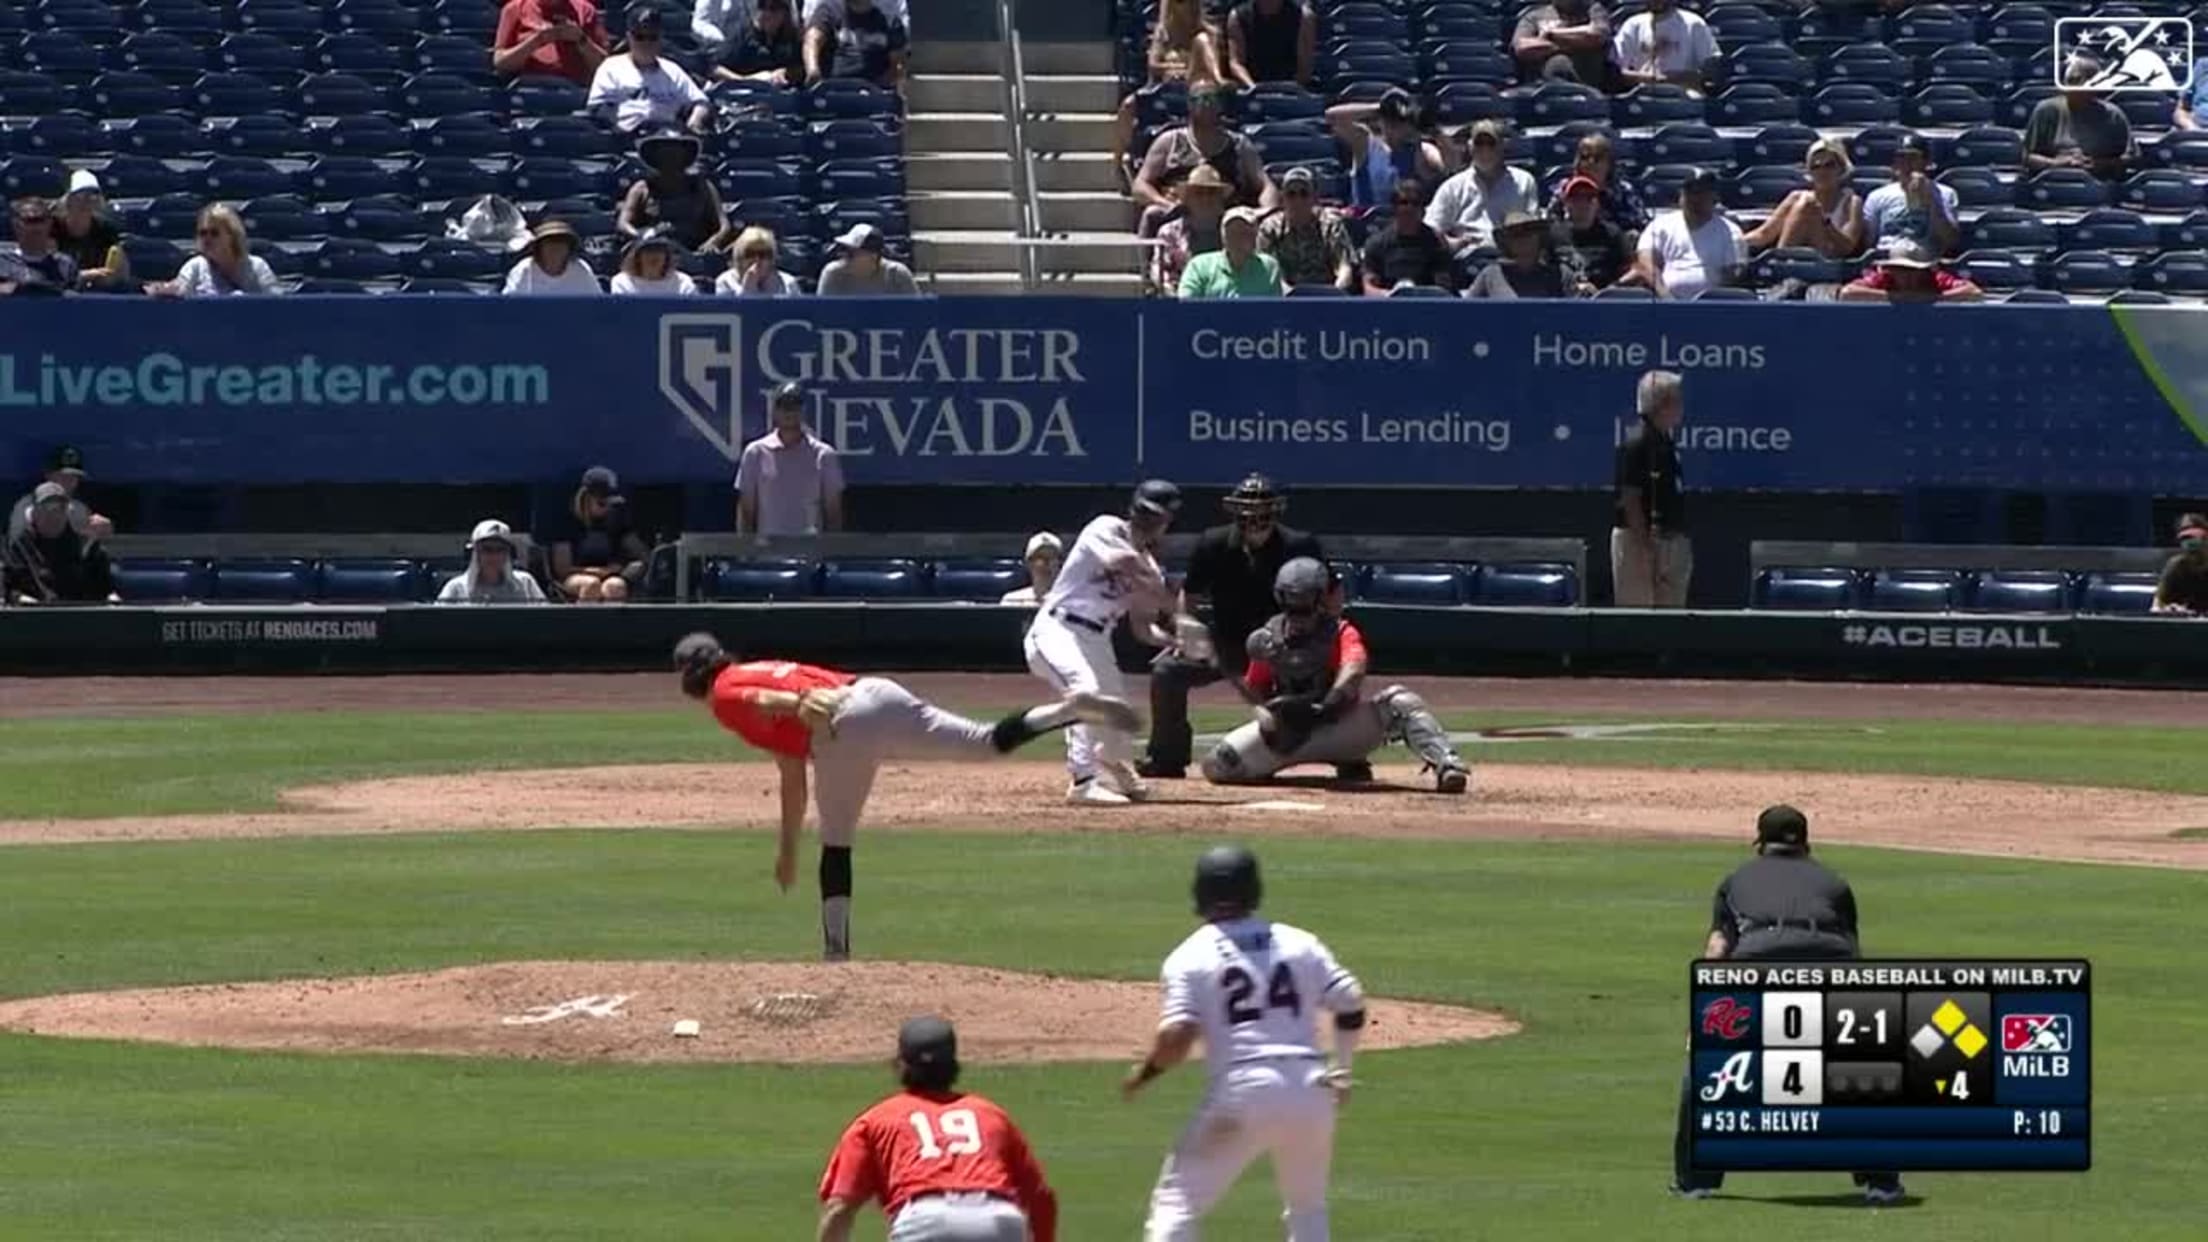 Dominic Canzone's RBI single